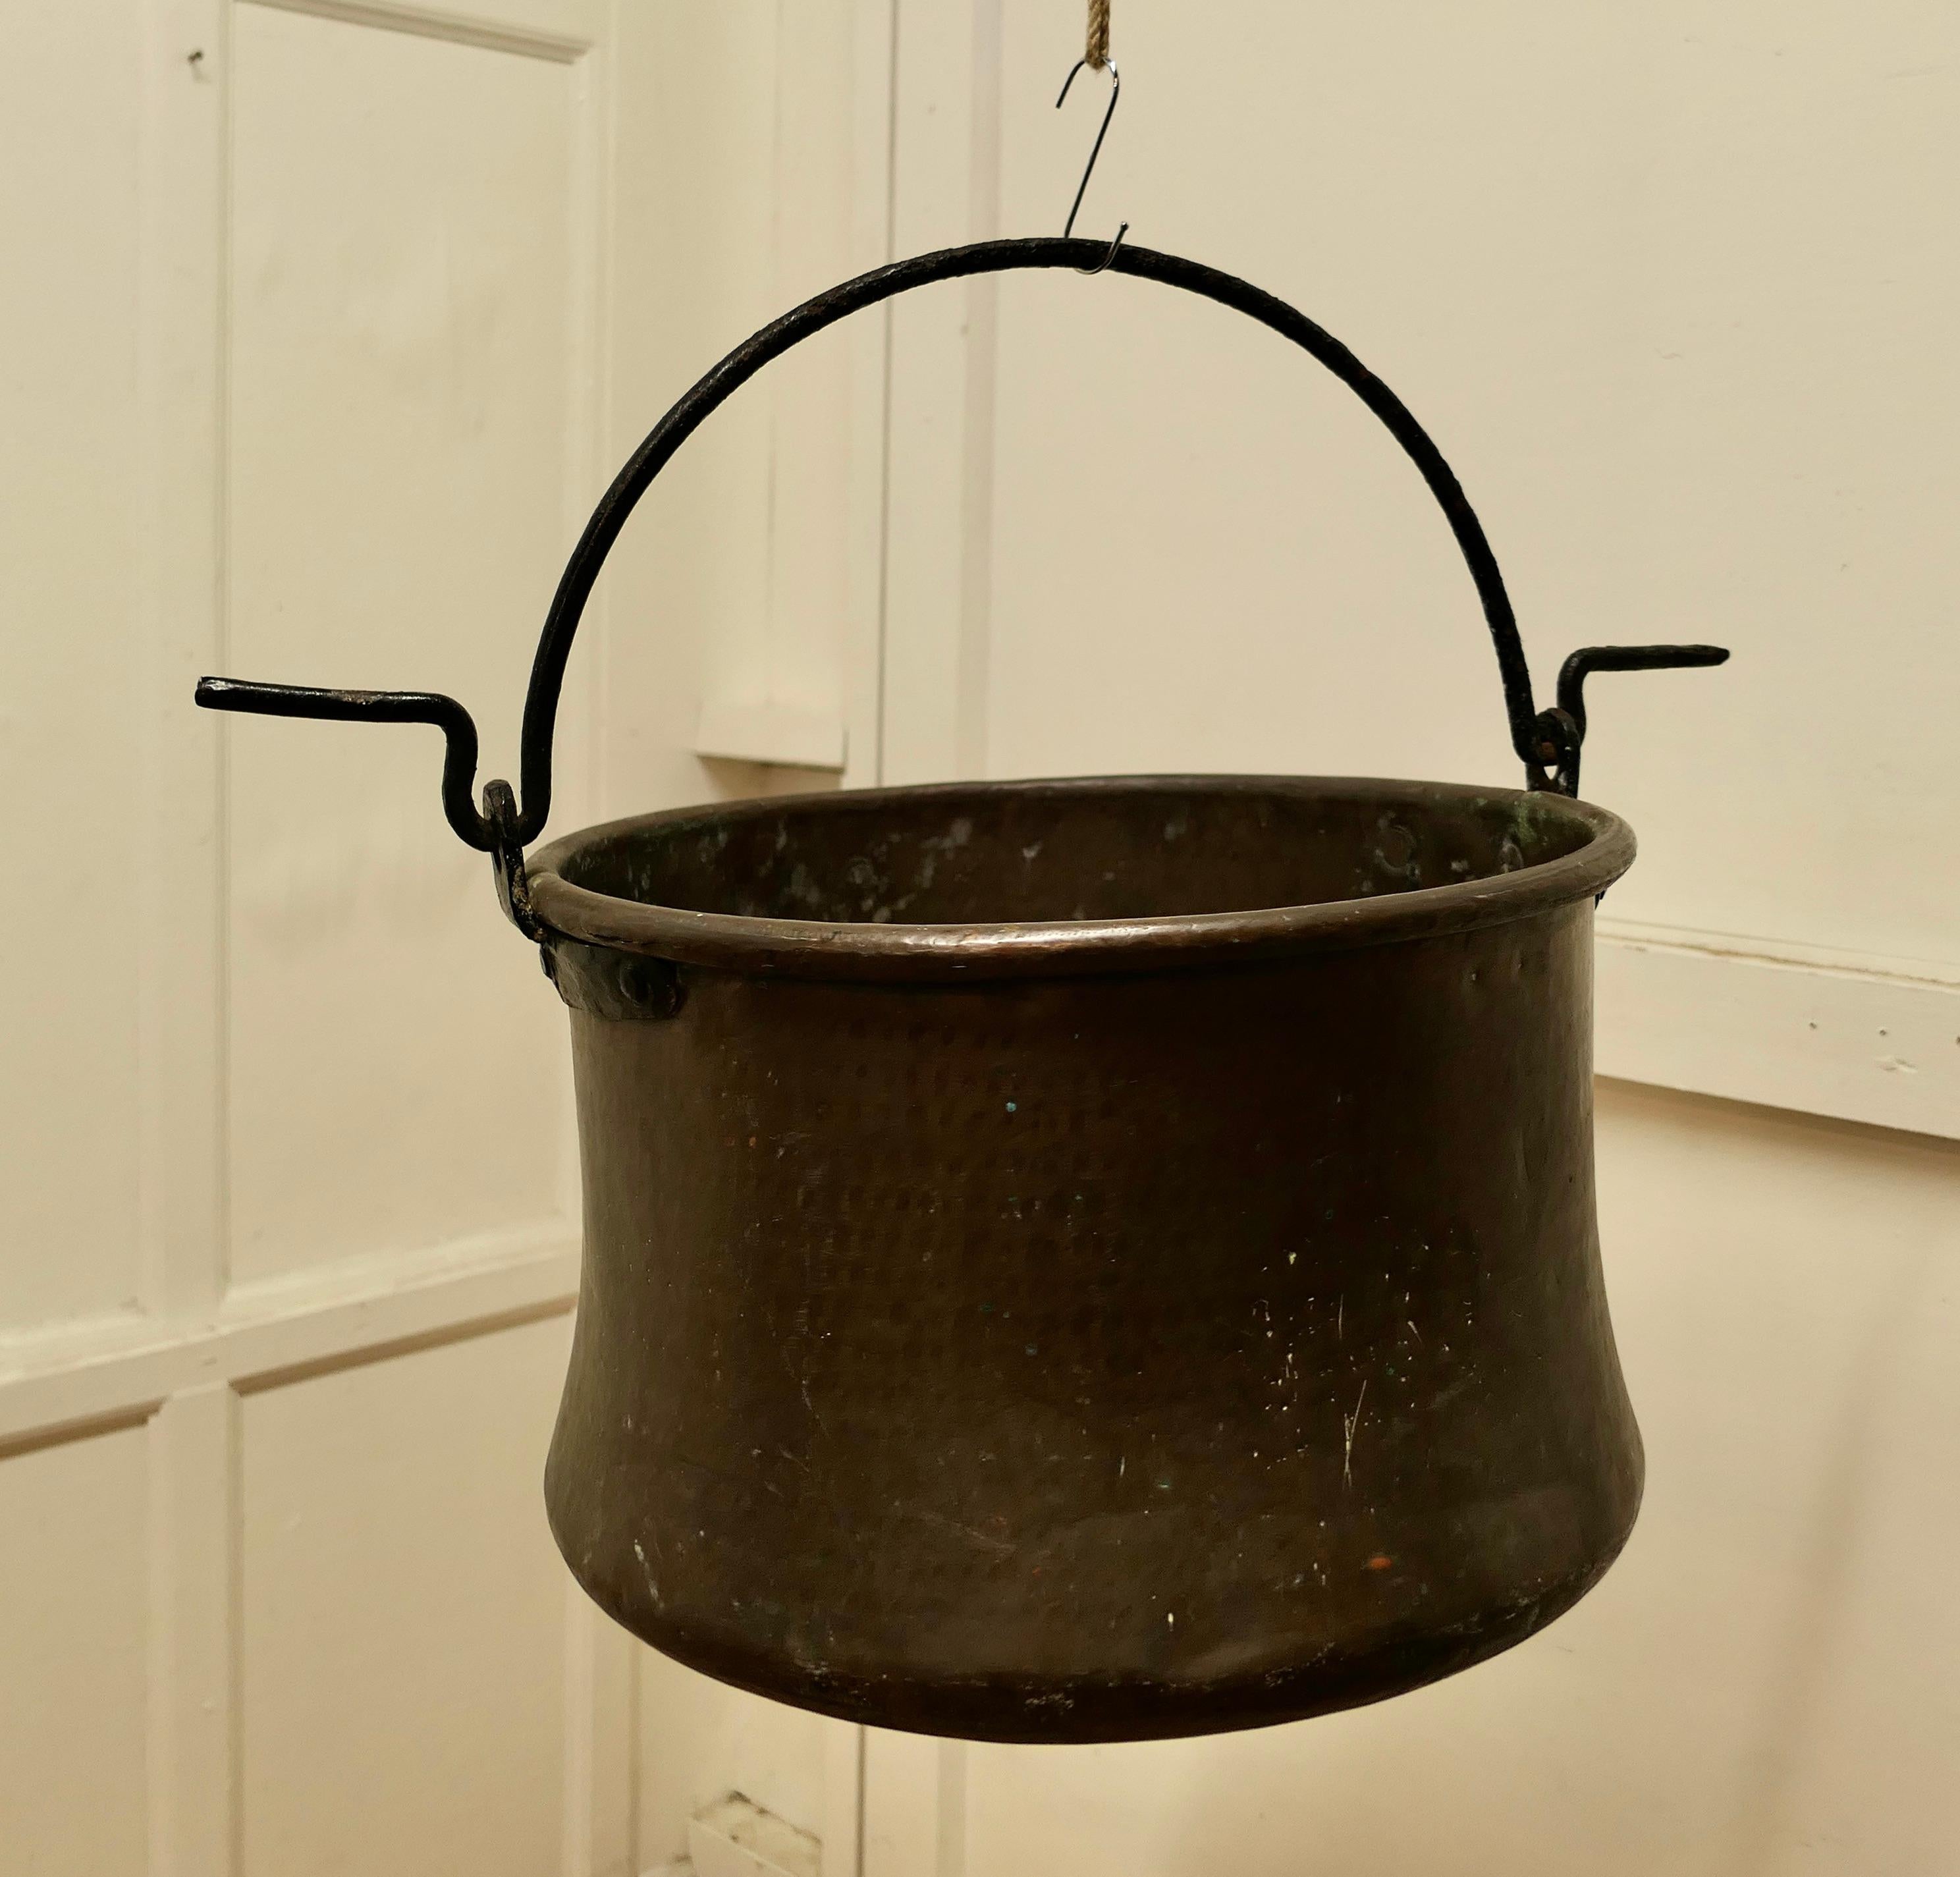 Very large 18th century brass cooking pot, Cauldron.

This is a lovely early cooking pot, it has been hand made in Brass, slightly flaring out at the bottom, to catch the maximum heat from the fire 
The pot has a rolled top.
and the Iron handle